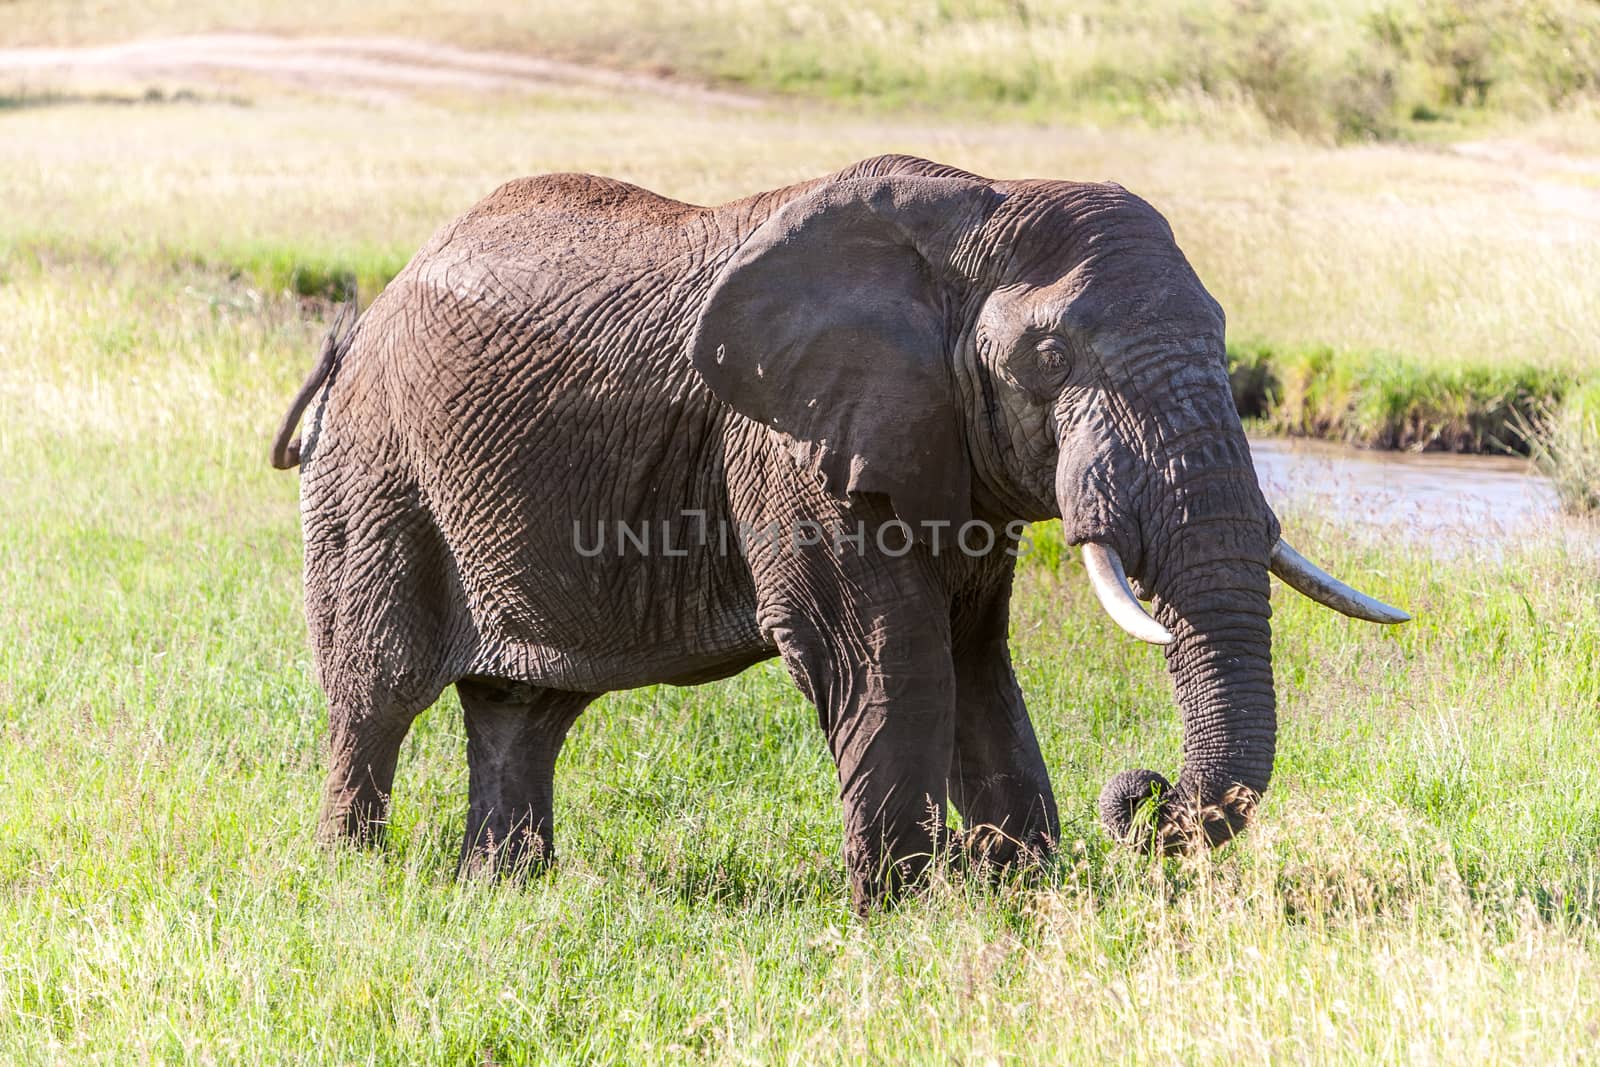 The African elephant walking in the savanna